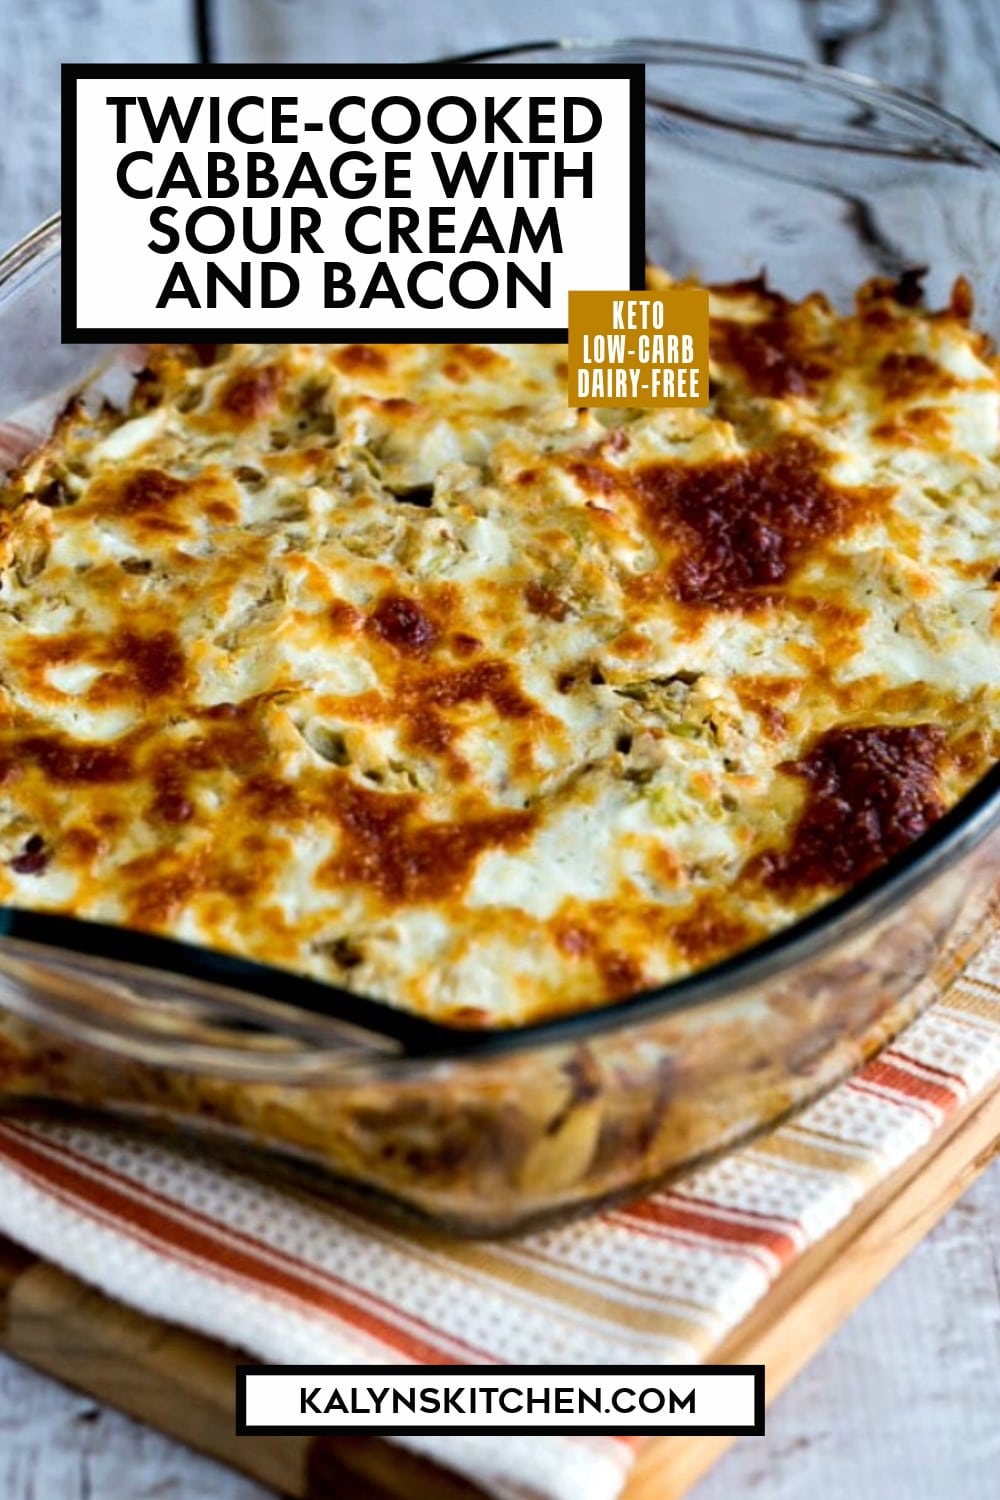 Pinterest image of Twice-Cooked Cabbage with Sour Cream and Bacon